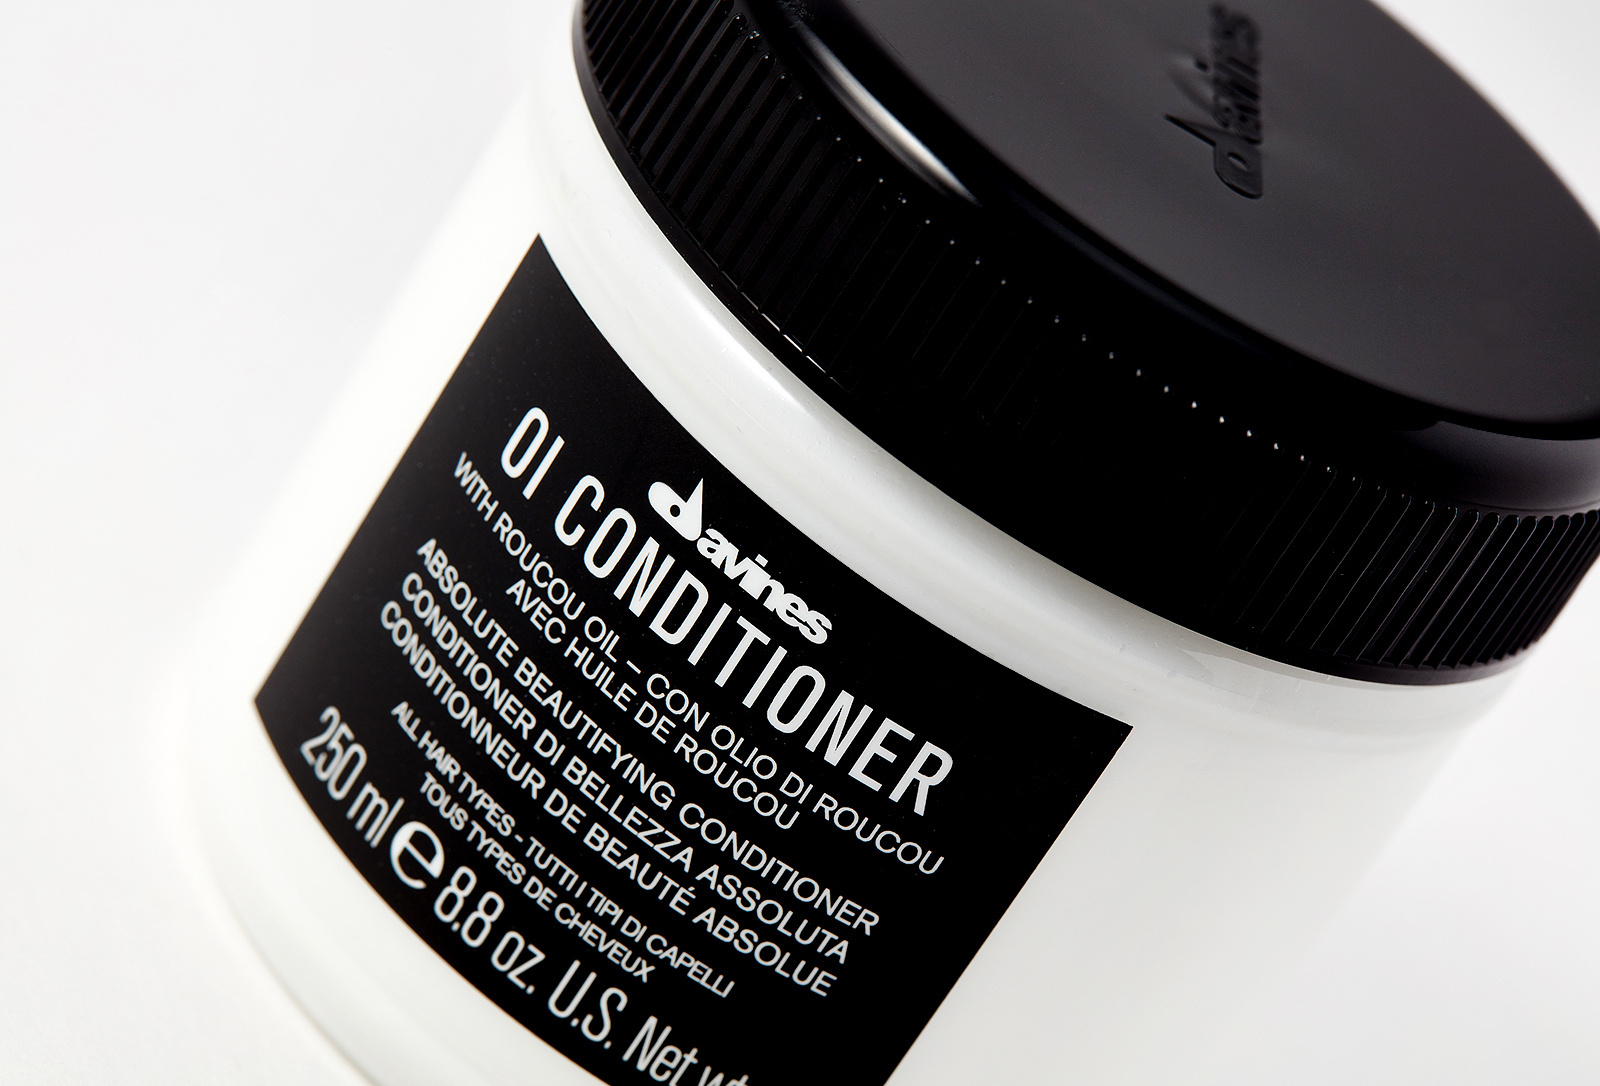 Davines absolute beautifying. Oi/absolute Beautifying Conditioner. Davines oi кондиционер. Davines кондиционер oi absolute Beautifying. Oi/absolute Beautifying Conditioner - кондиционер для абсолютной красоты волос.